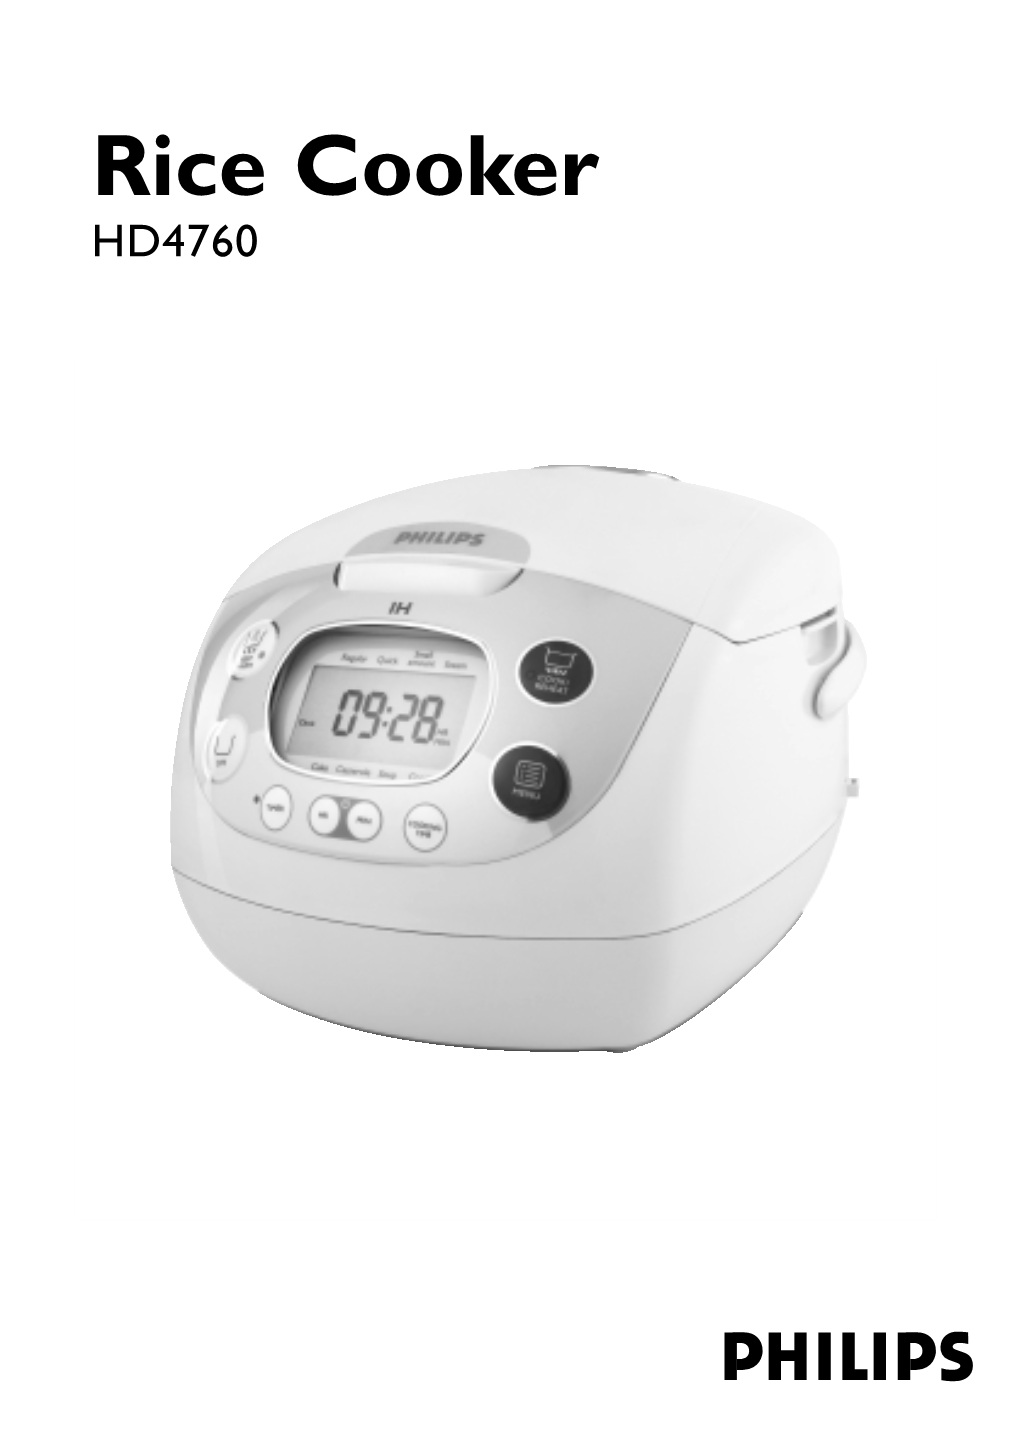 Rice Cooker HD4760 2 3